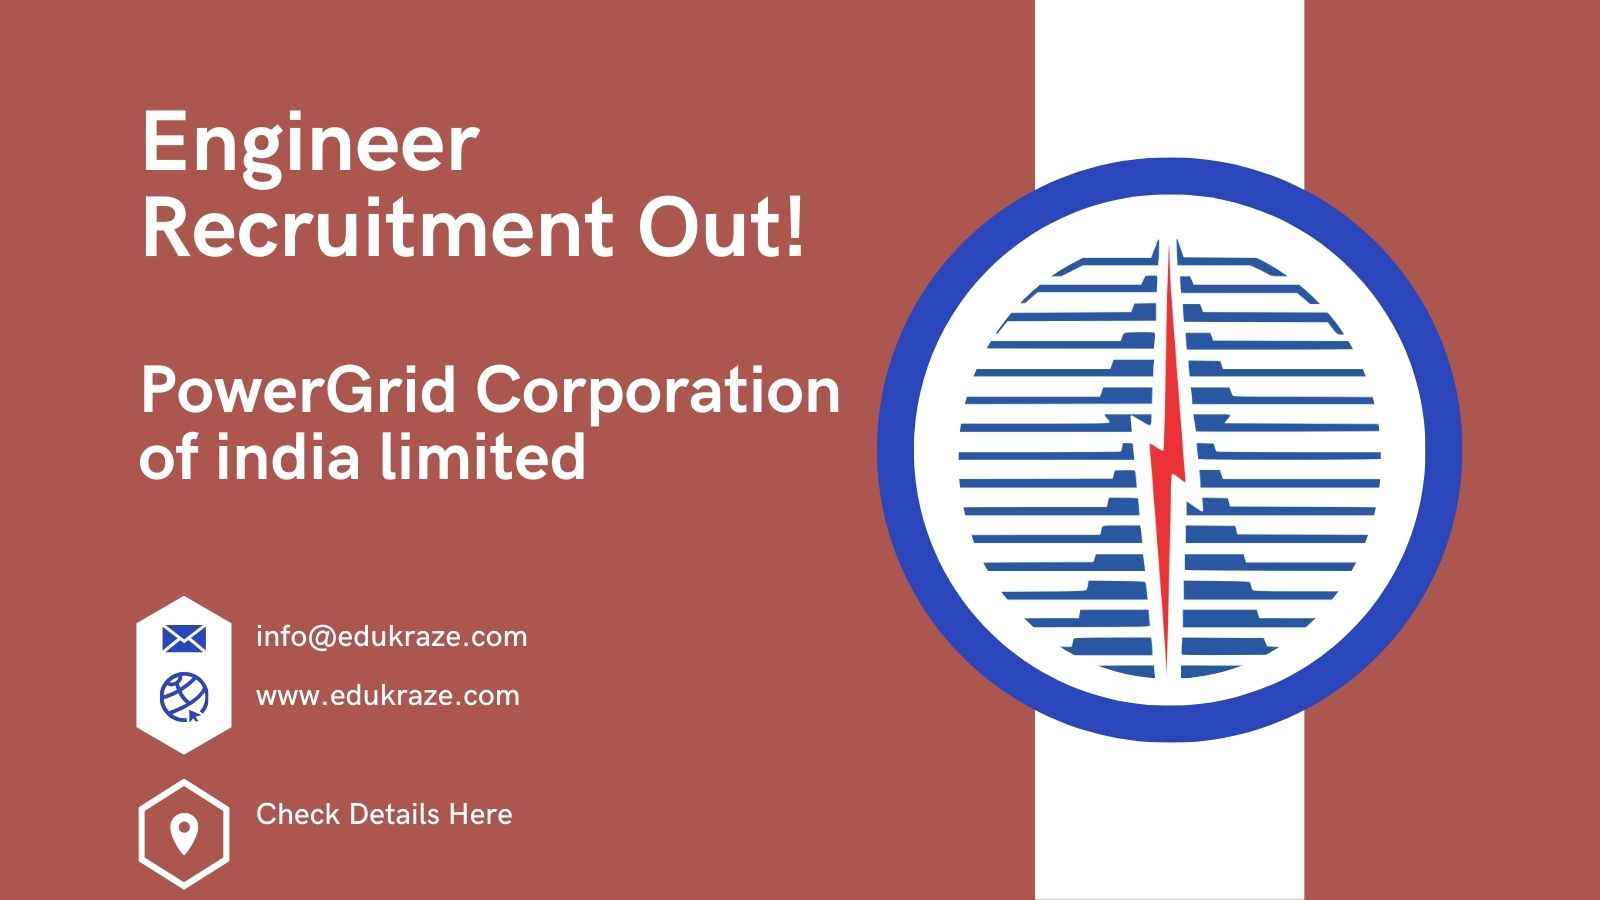 PowerGrid Recruitment out For Engineer, Apply Now!